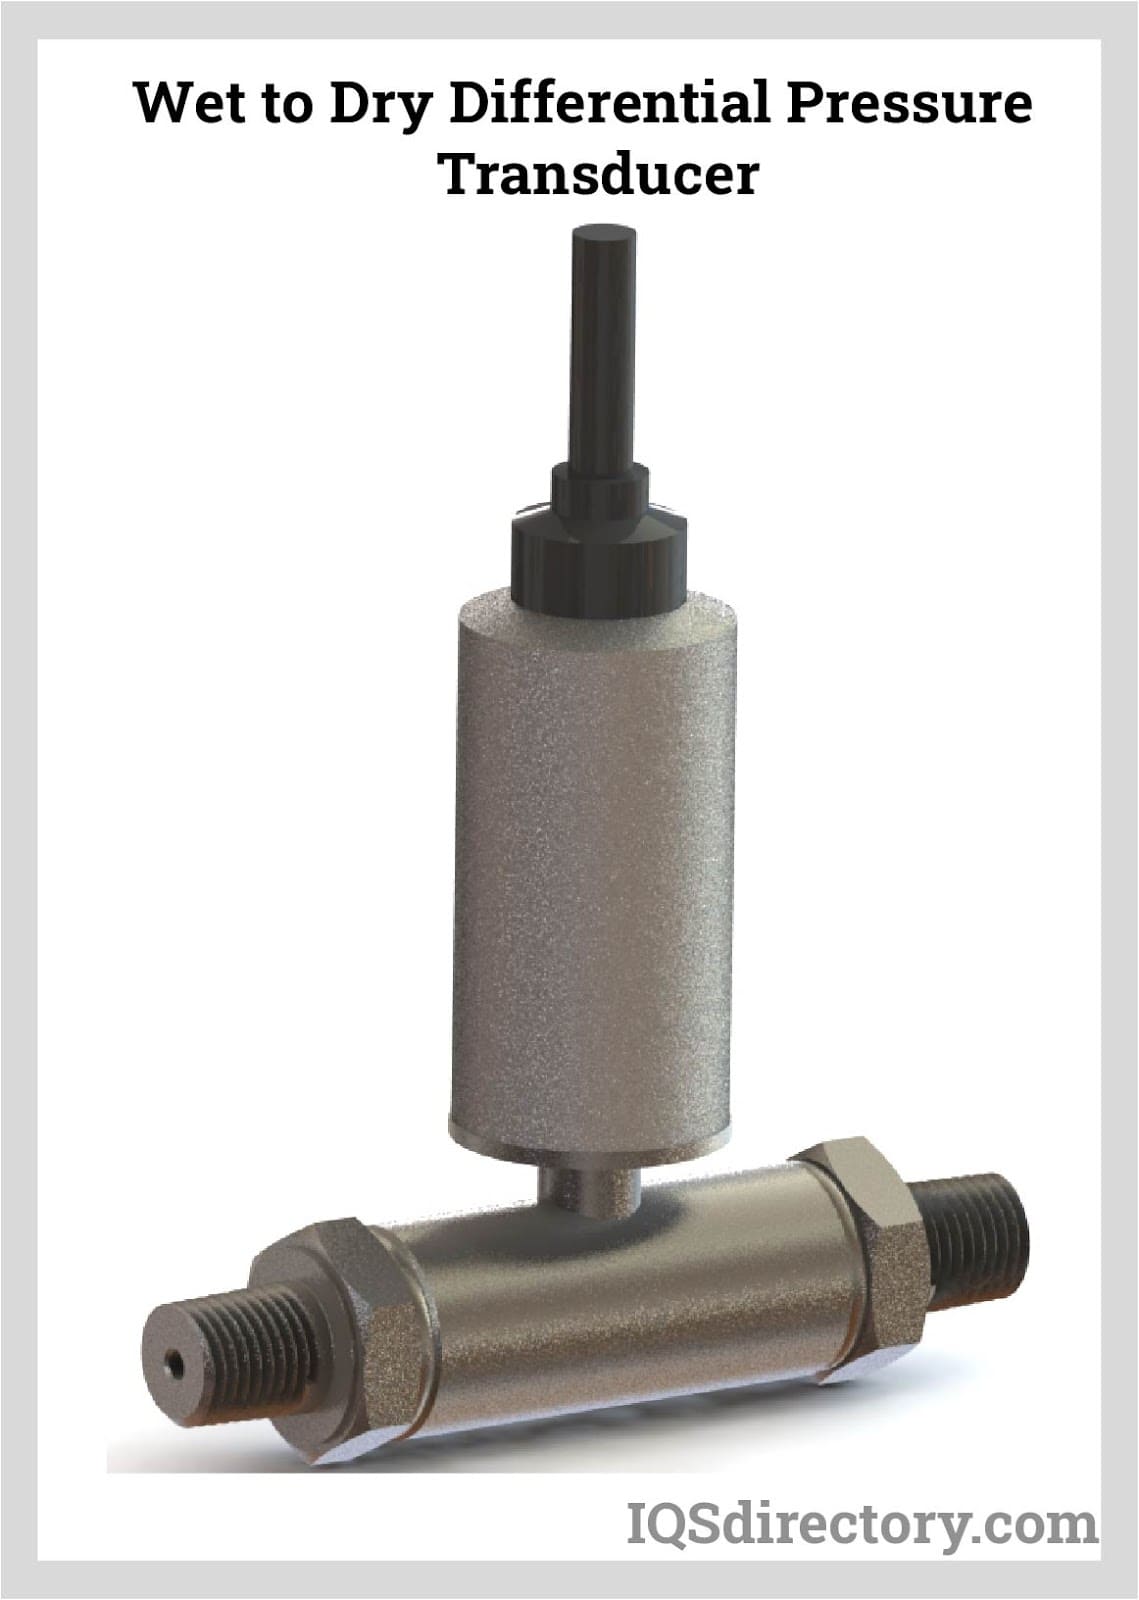 wet to dry differential pressure transducer